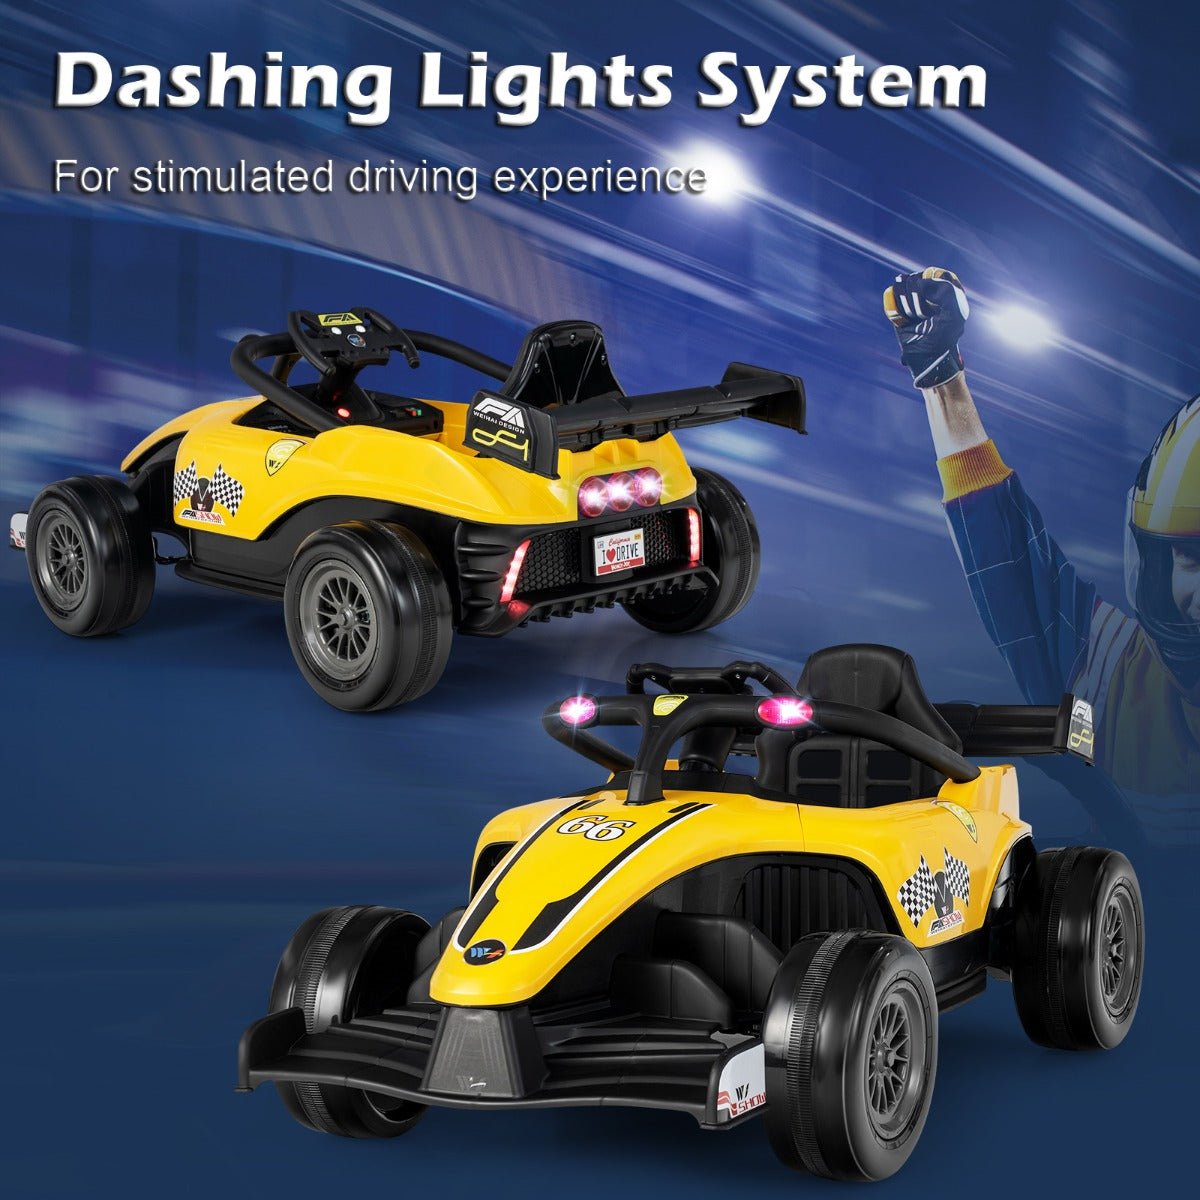 Quality Playtime Fun with Electric Ride on Racing Car in Yellow